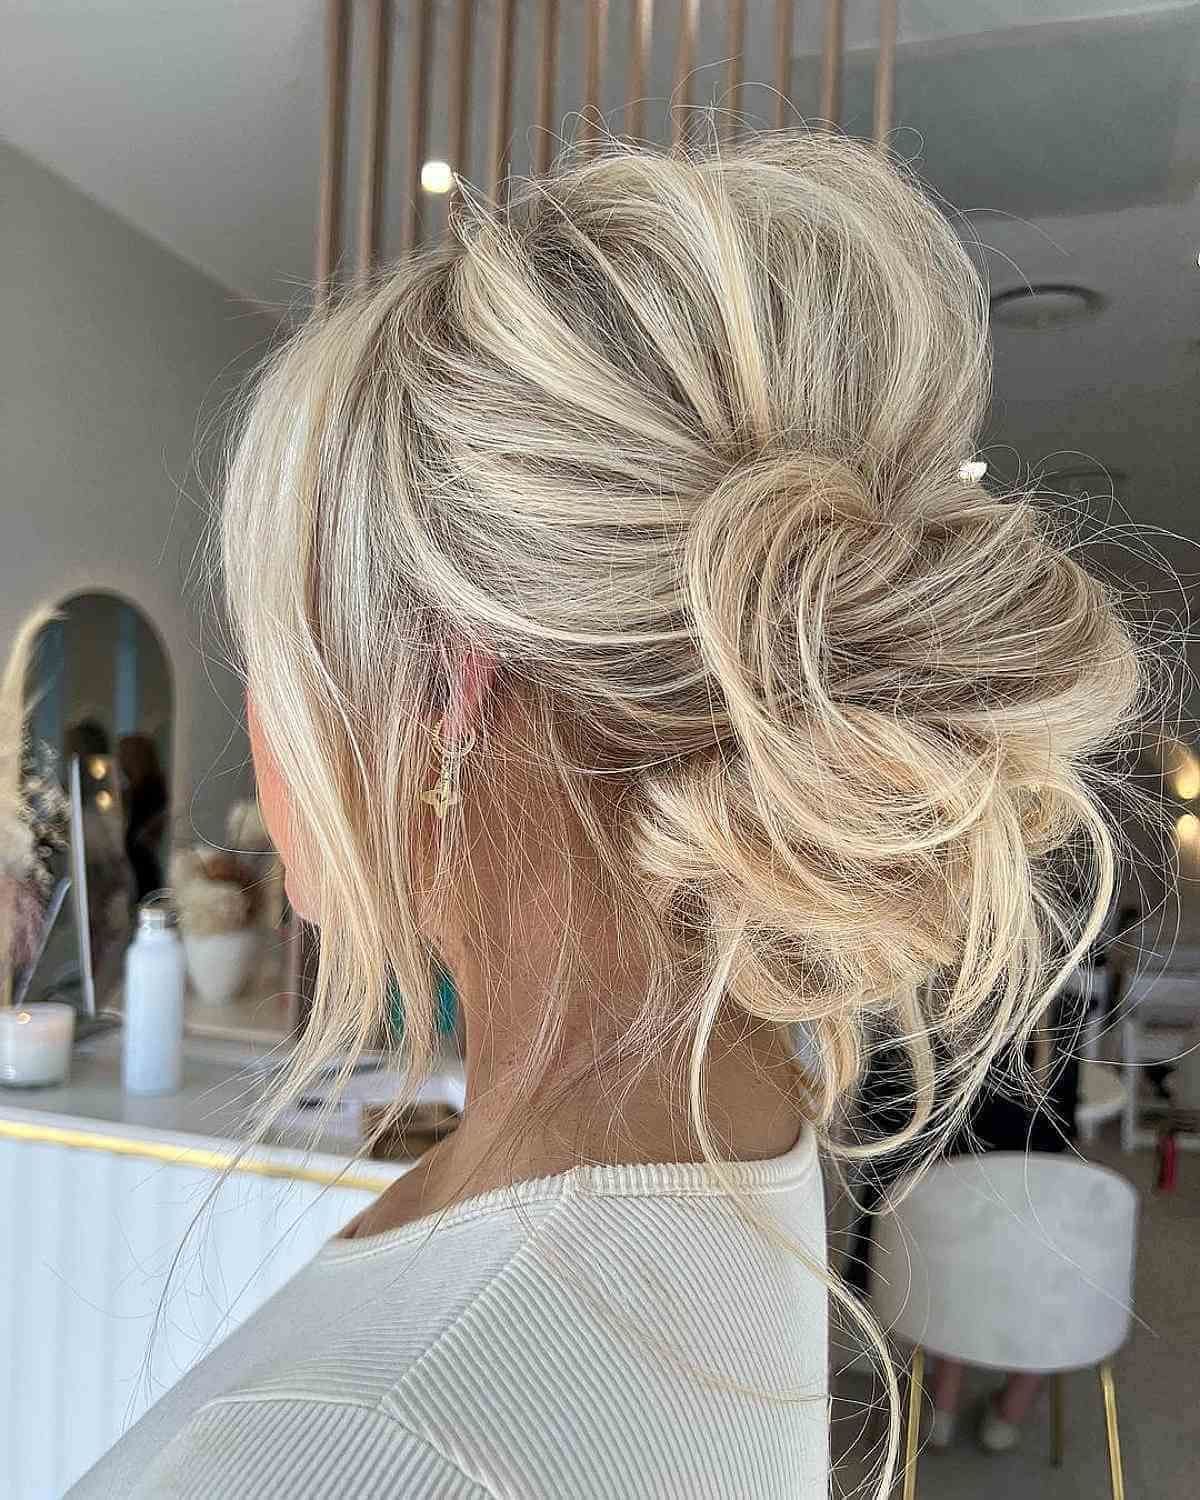 25 Easy & Cute Updos For Medium Hair With Most Recent Medium Hair Updos Hairstyles (View 15 of 25)